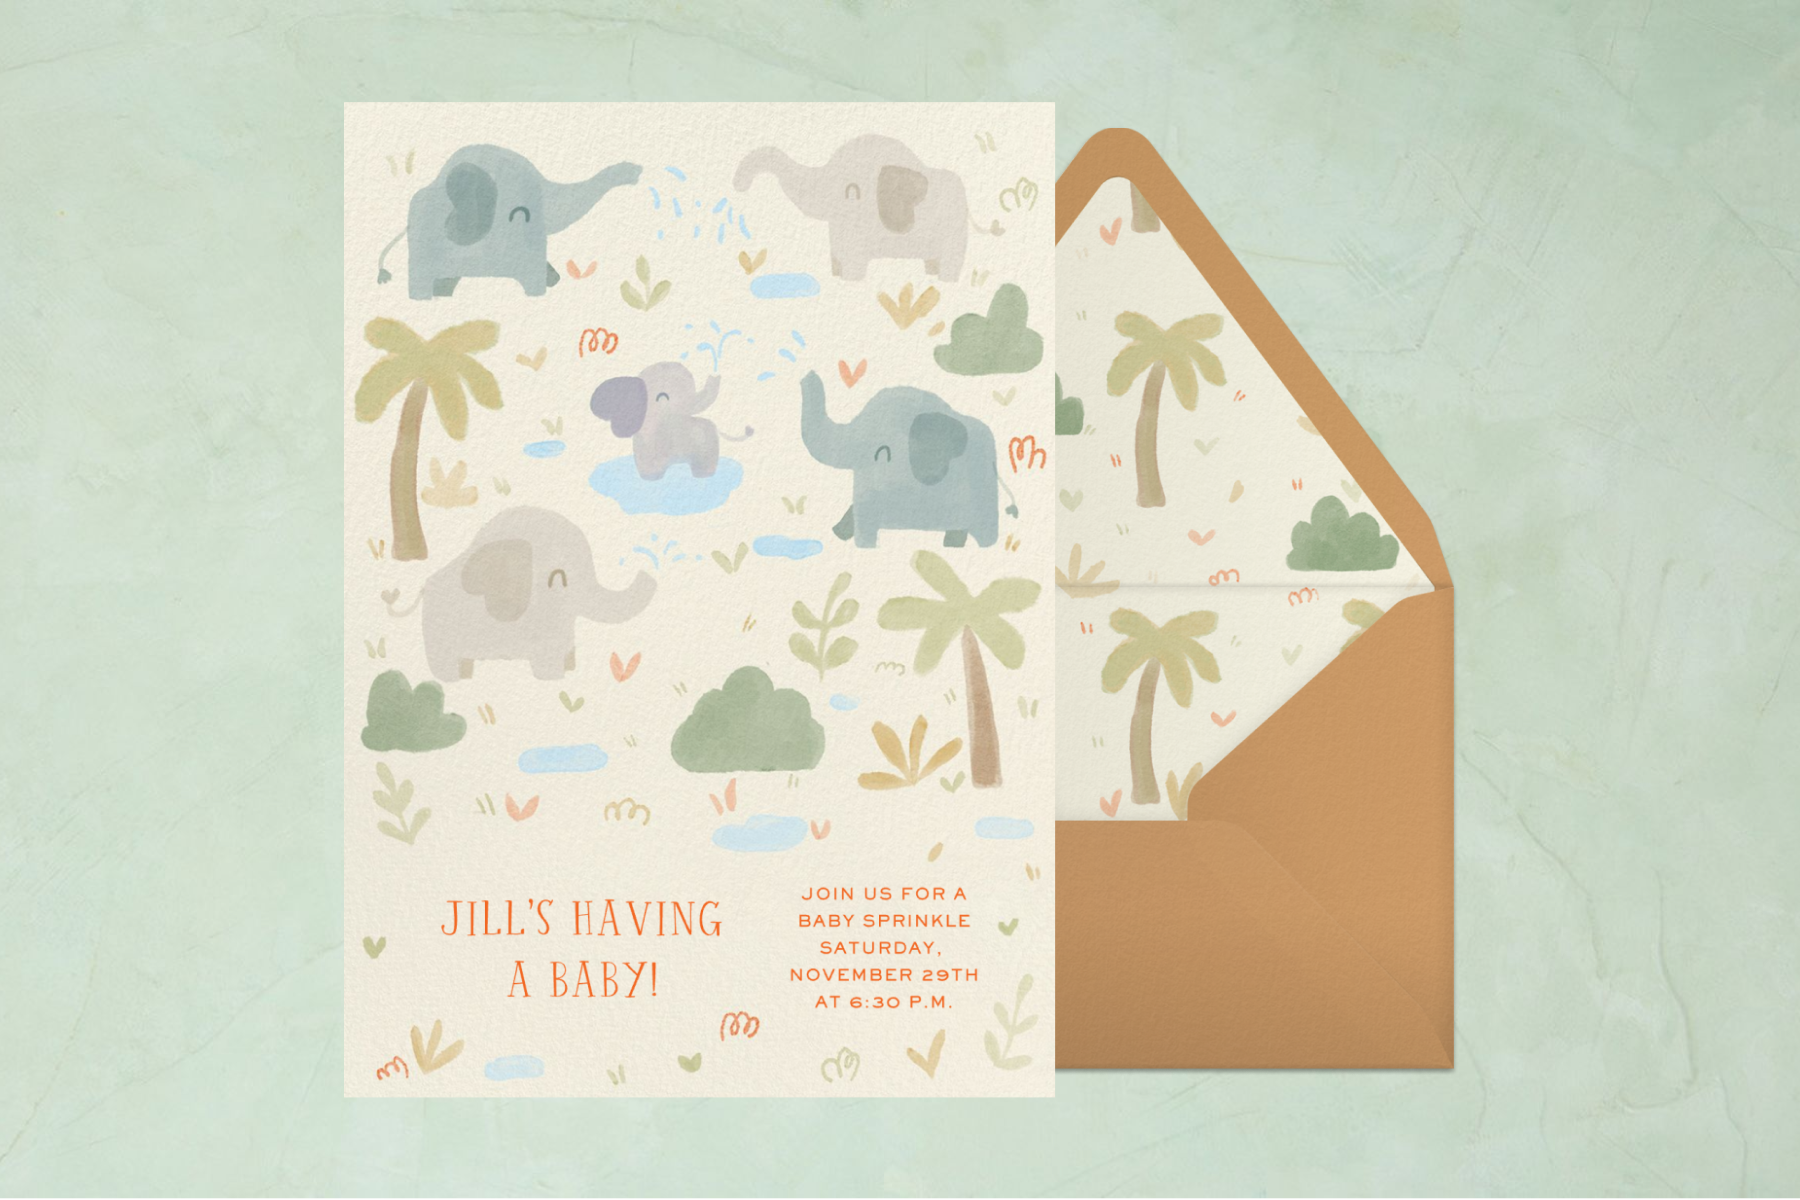 baby shower invitation with elephants playing in water with an orange-brown envelope